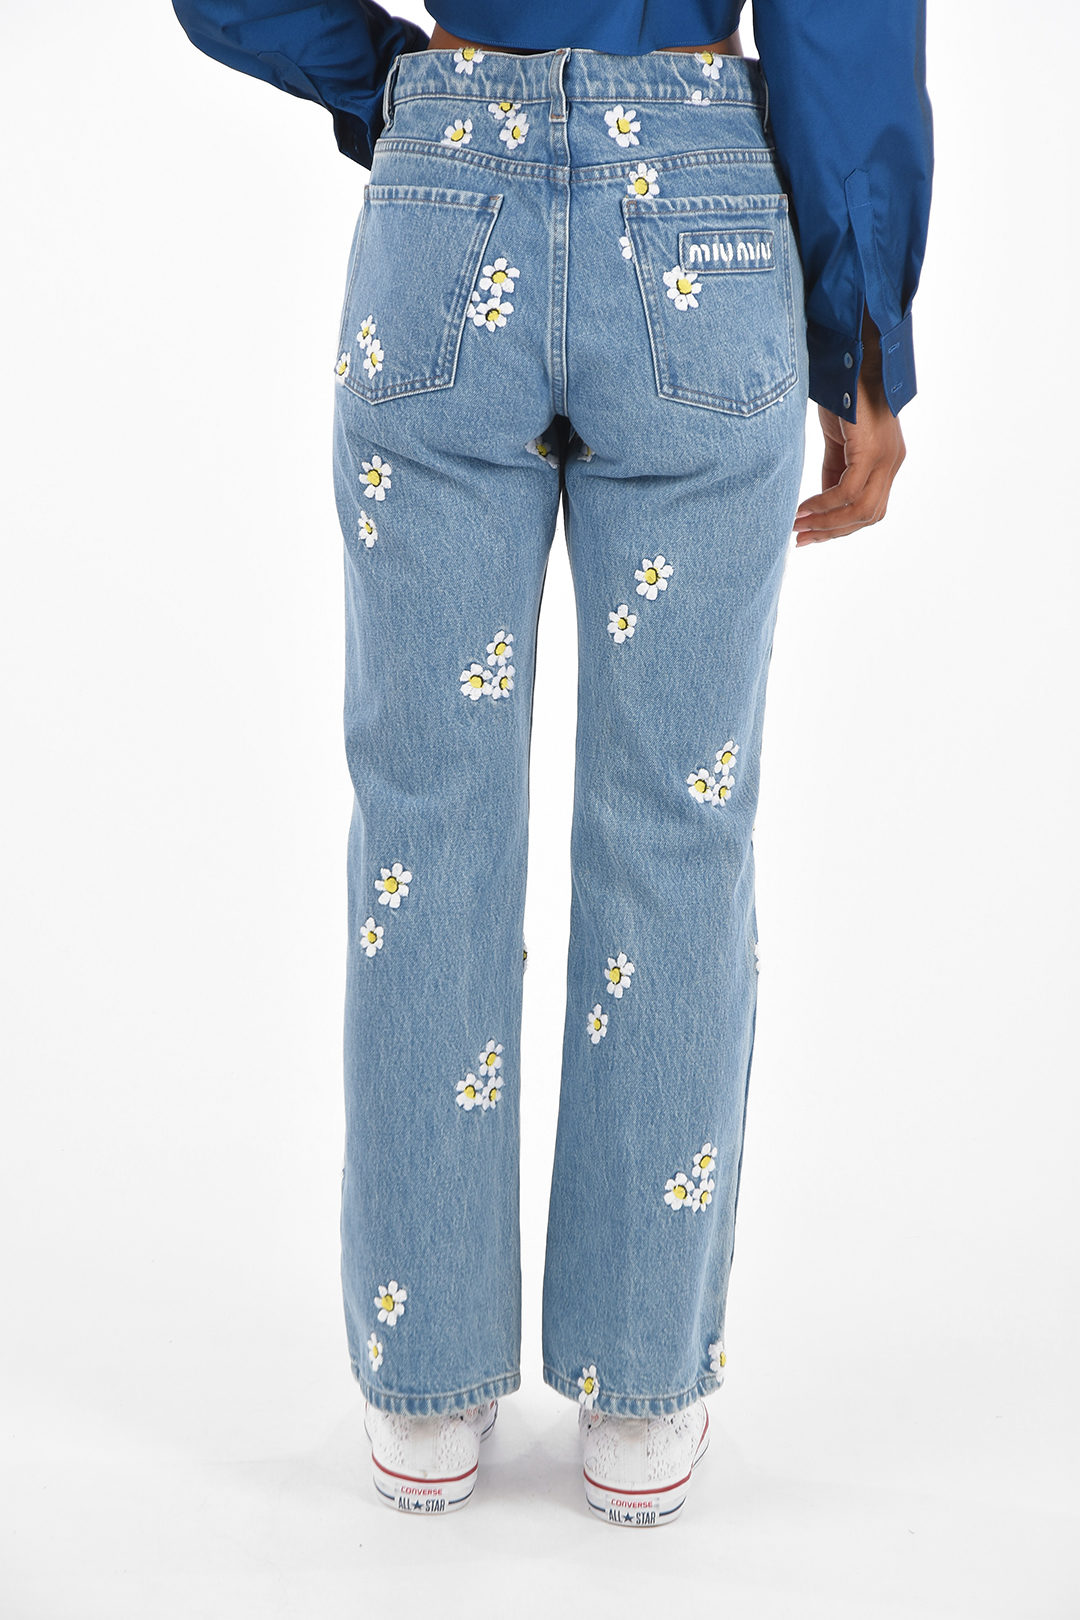 Embroidered Daisy regular fit jeans